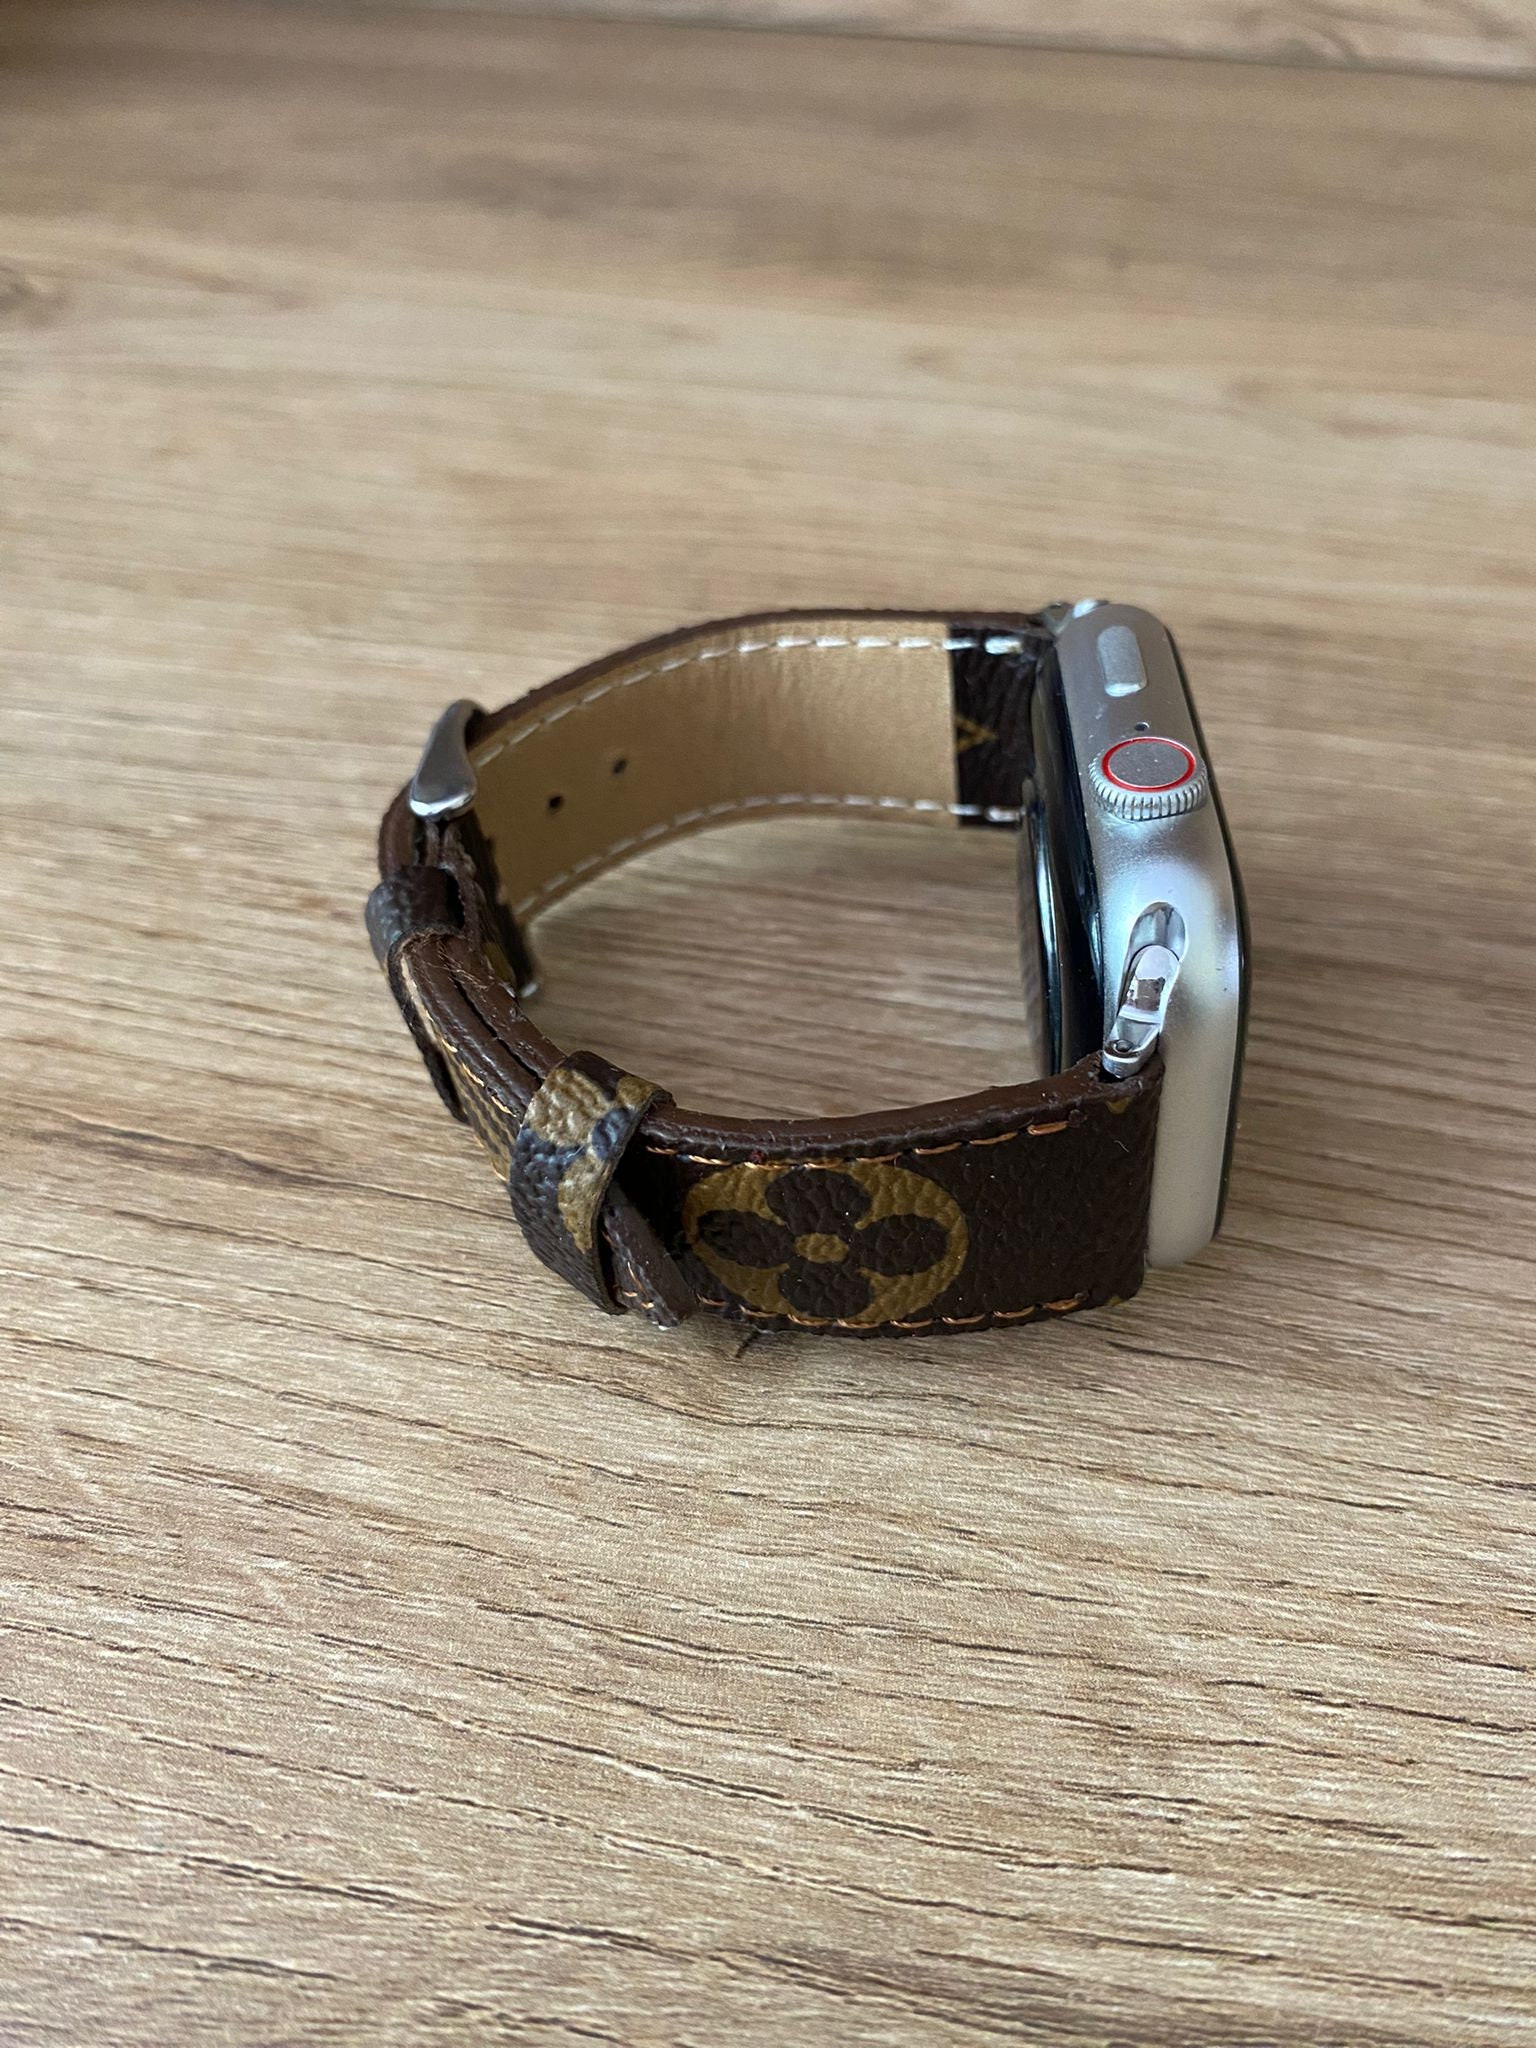 Handmade Authentic Louis Vuitton Apple Watch Band all series 8-7-6-5-4